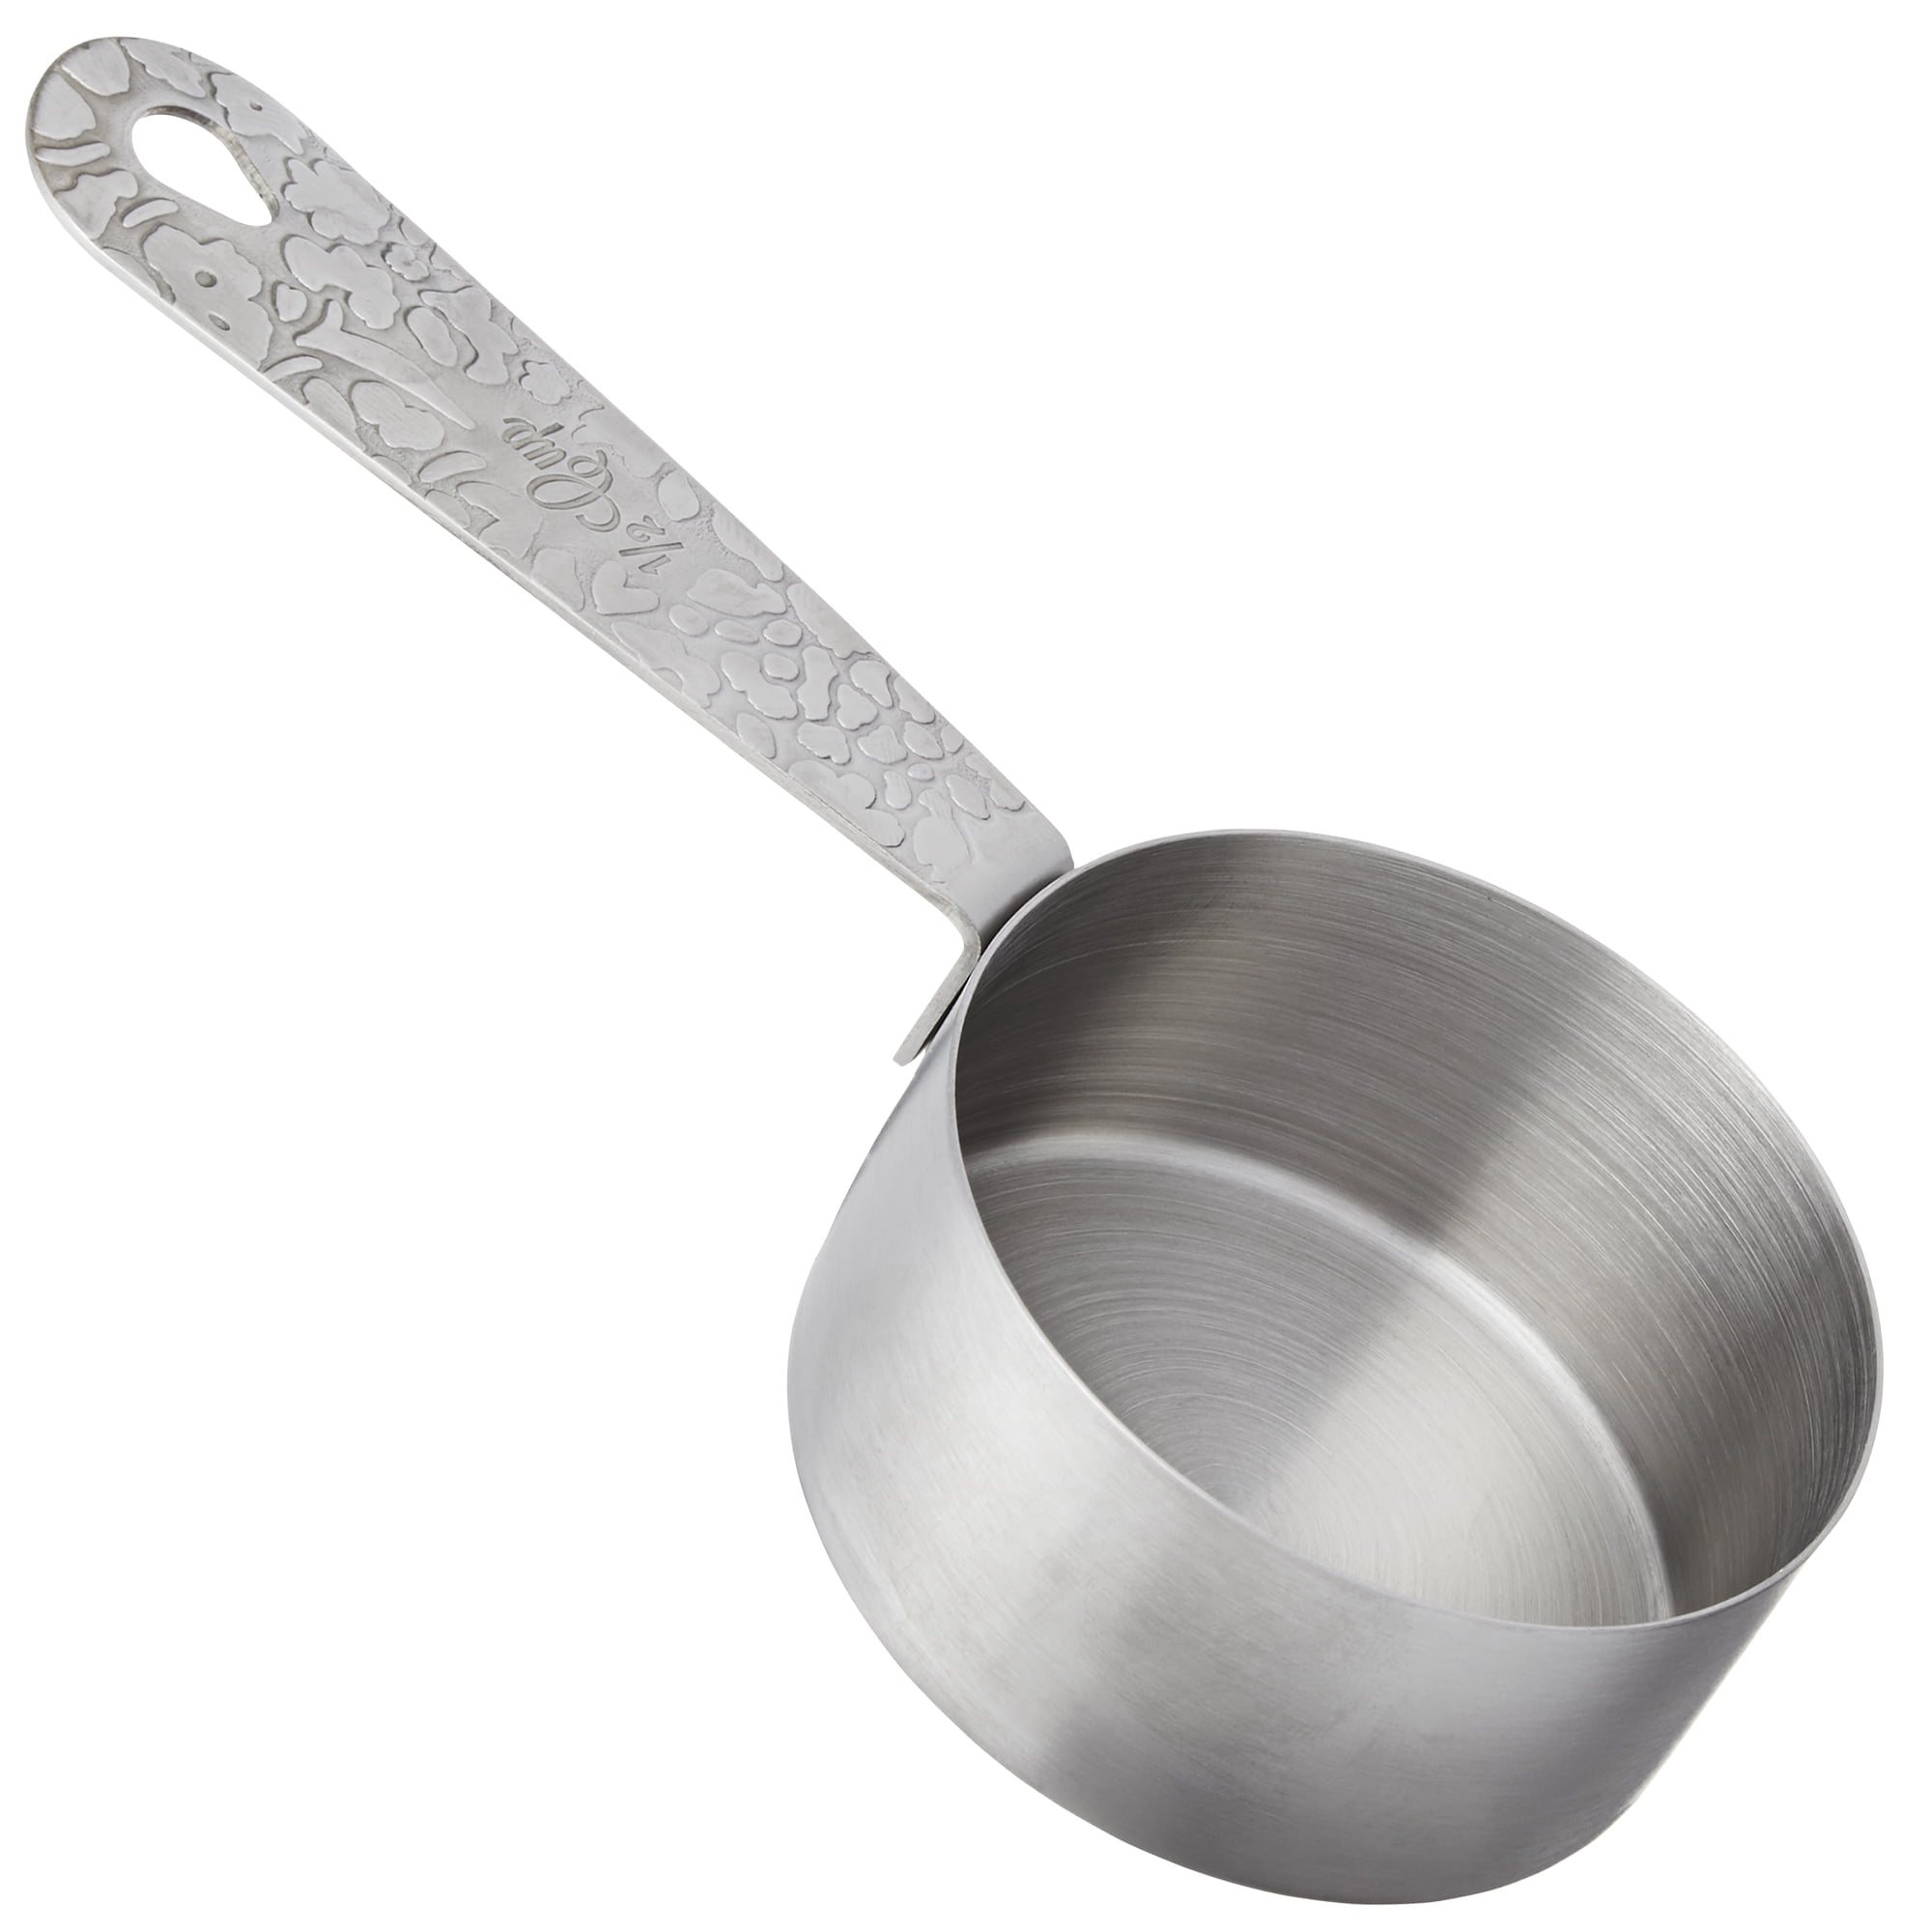 Stainless Steel Odd Size Dry Measuring Cups, Set of 4 + Reviews